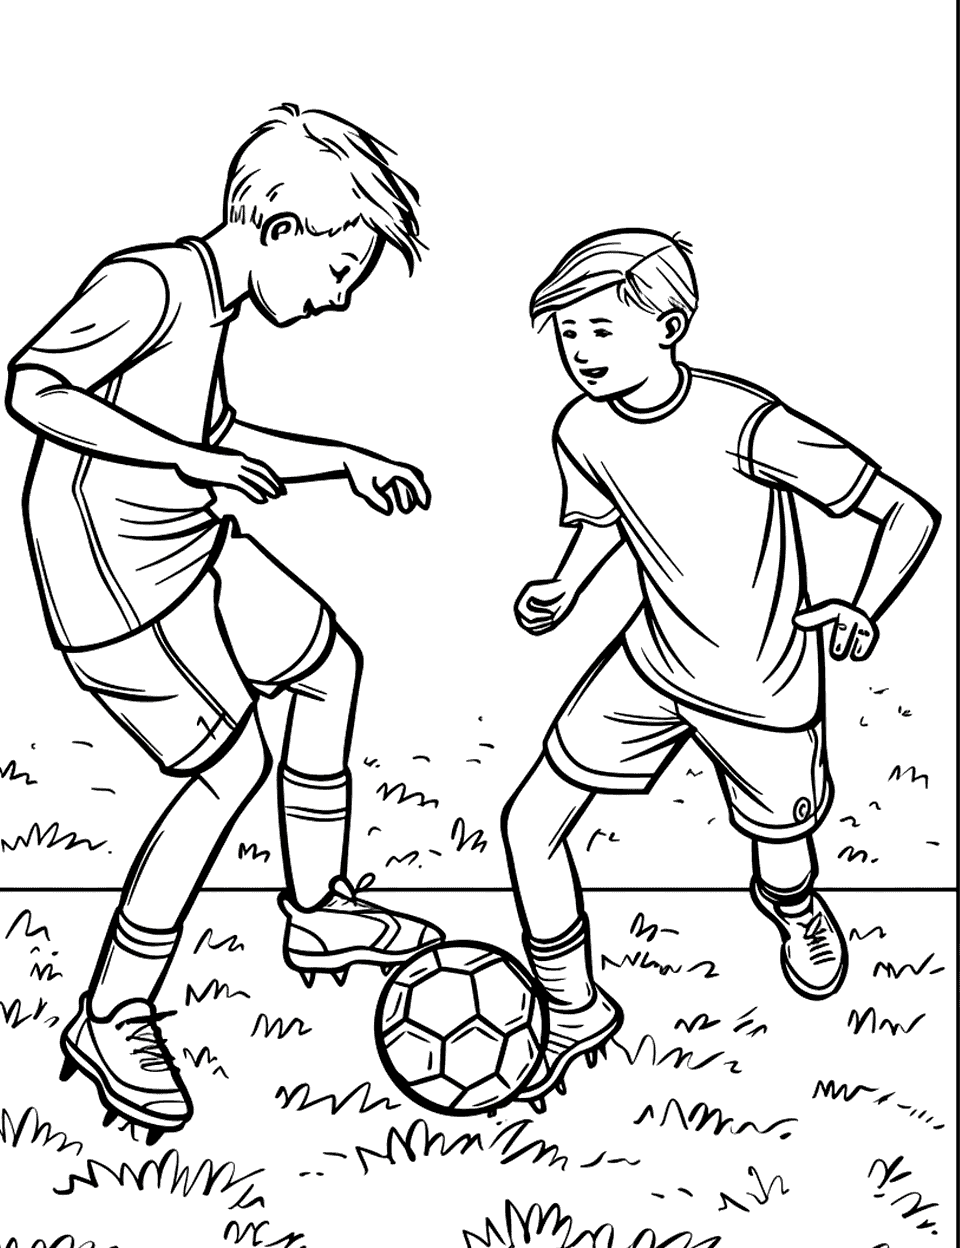 Children Playing Soccer in the Park Coloring Page - Kids playing a casual game of soccer in the park.